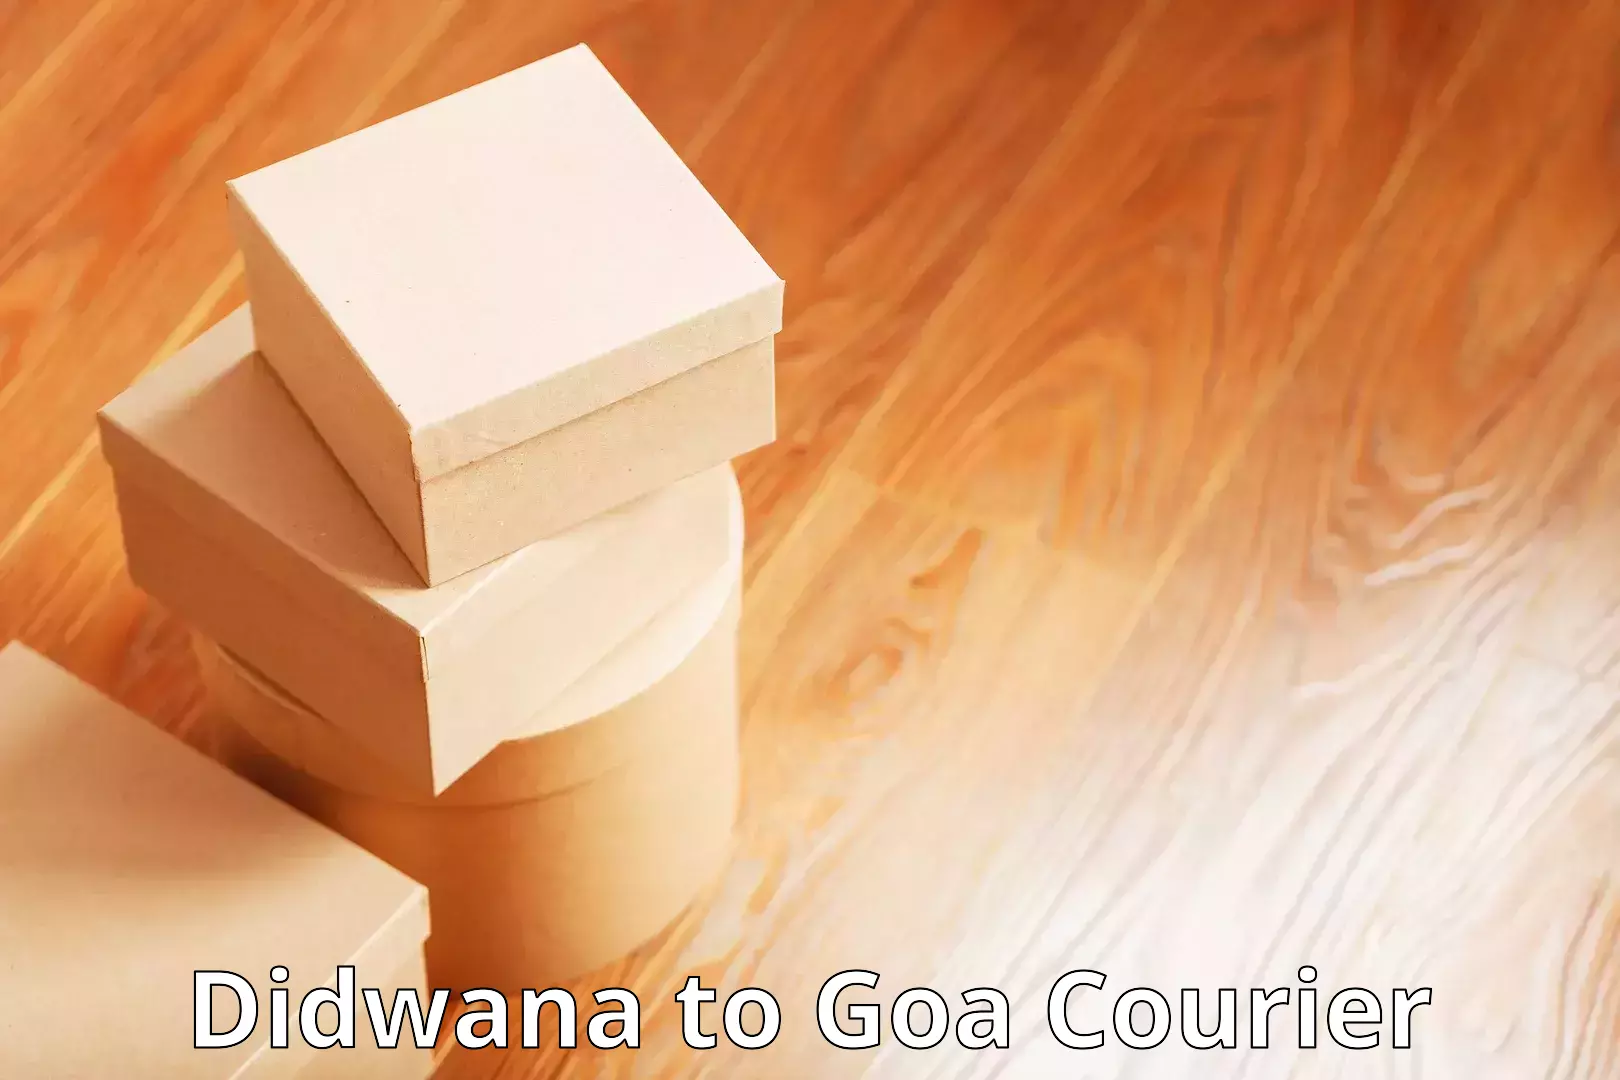 Courier service booking in Didwana to Panjim